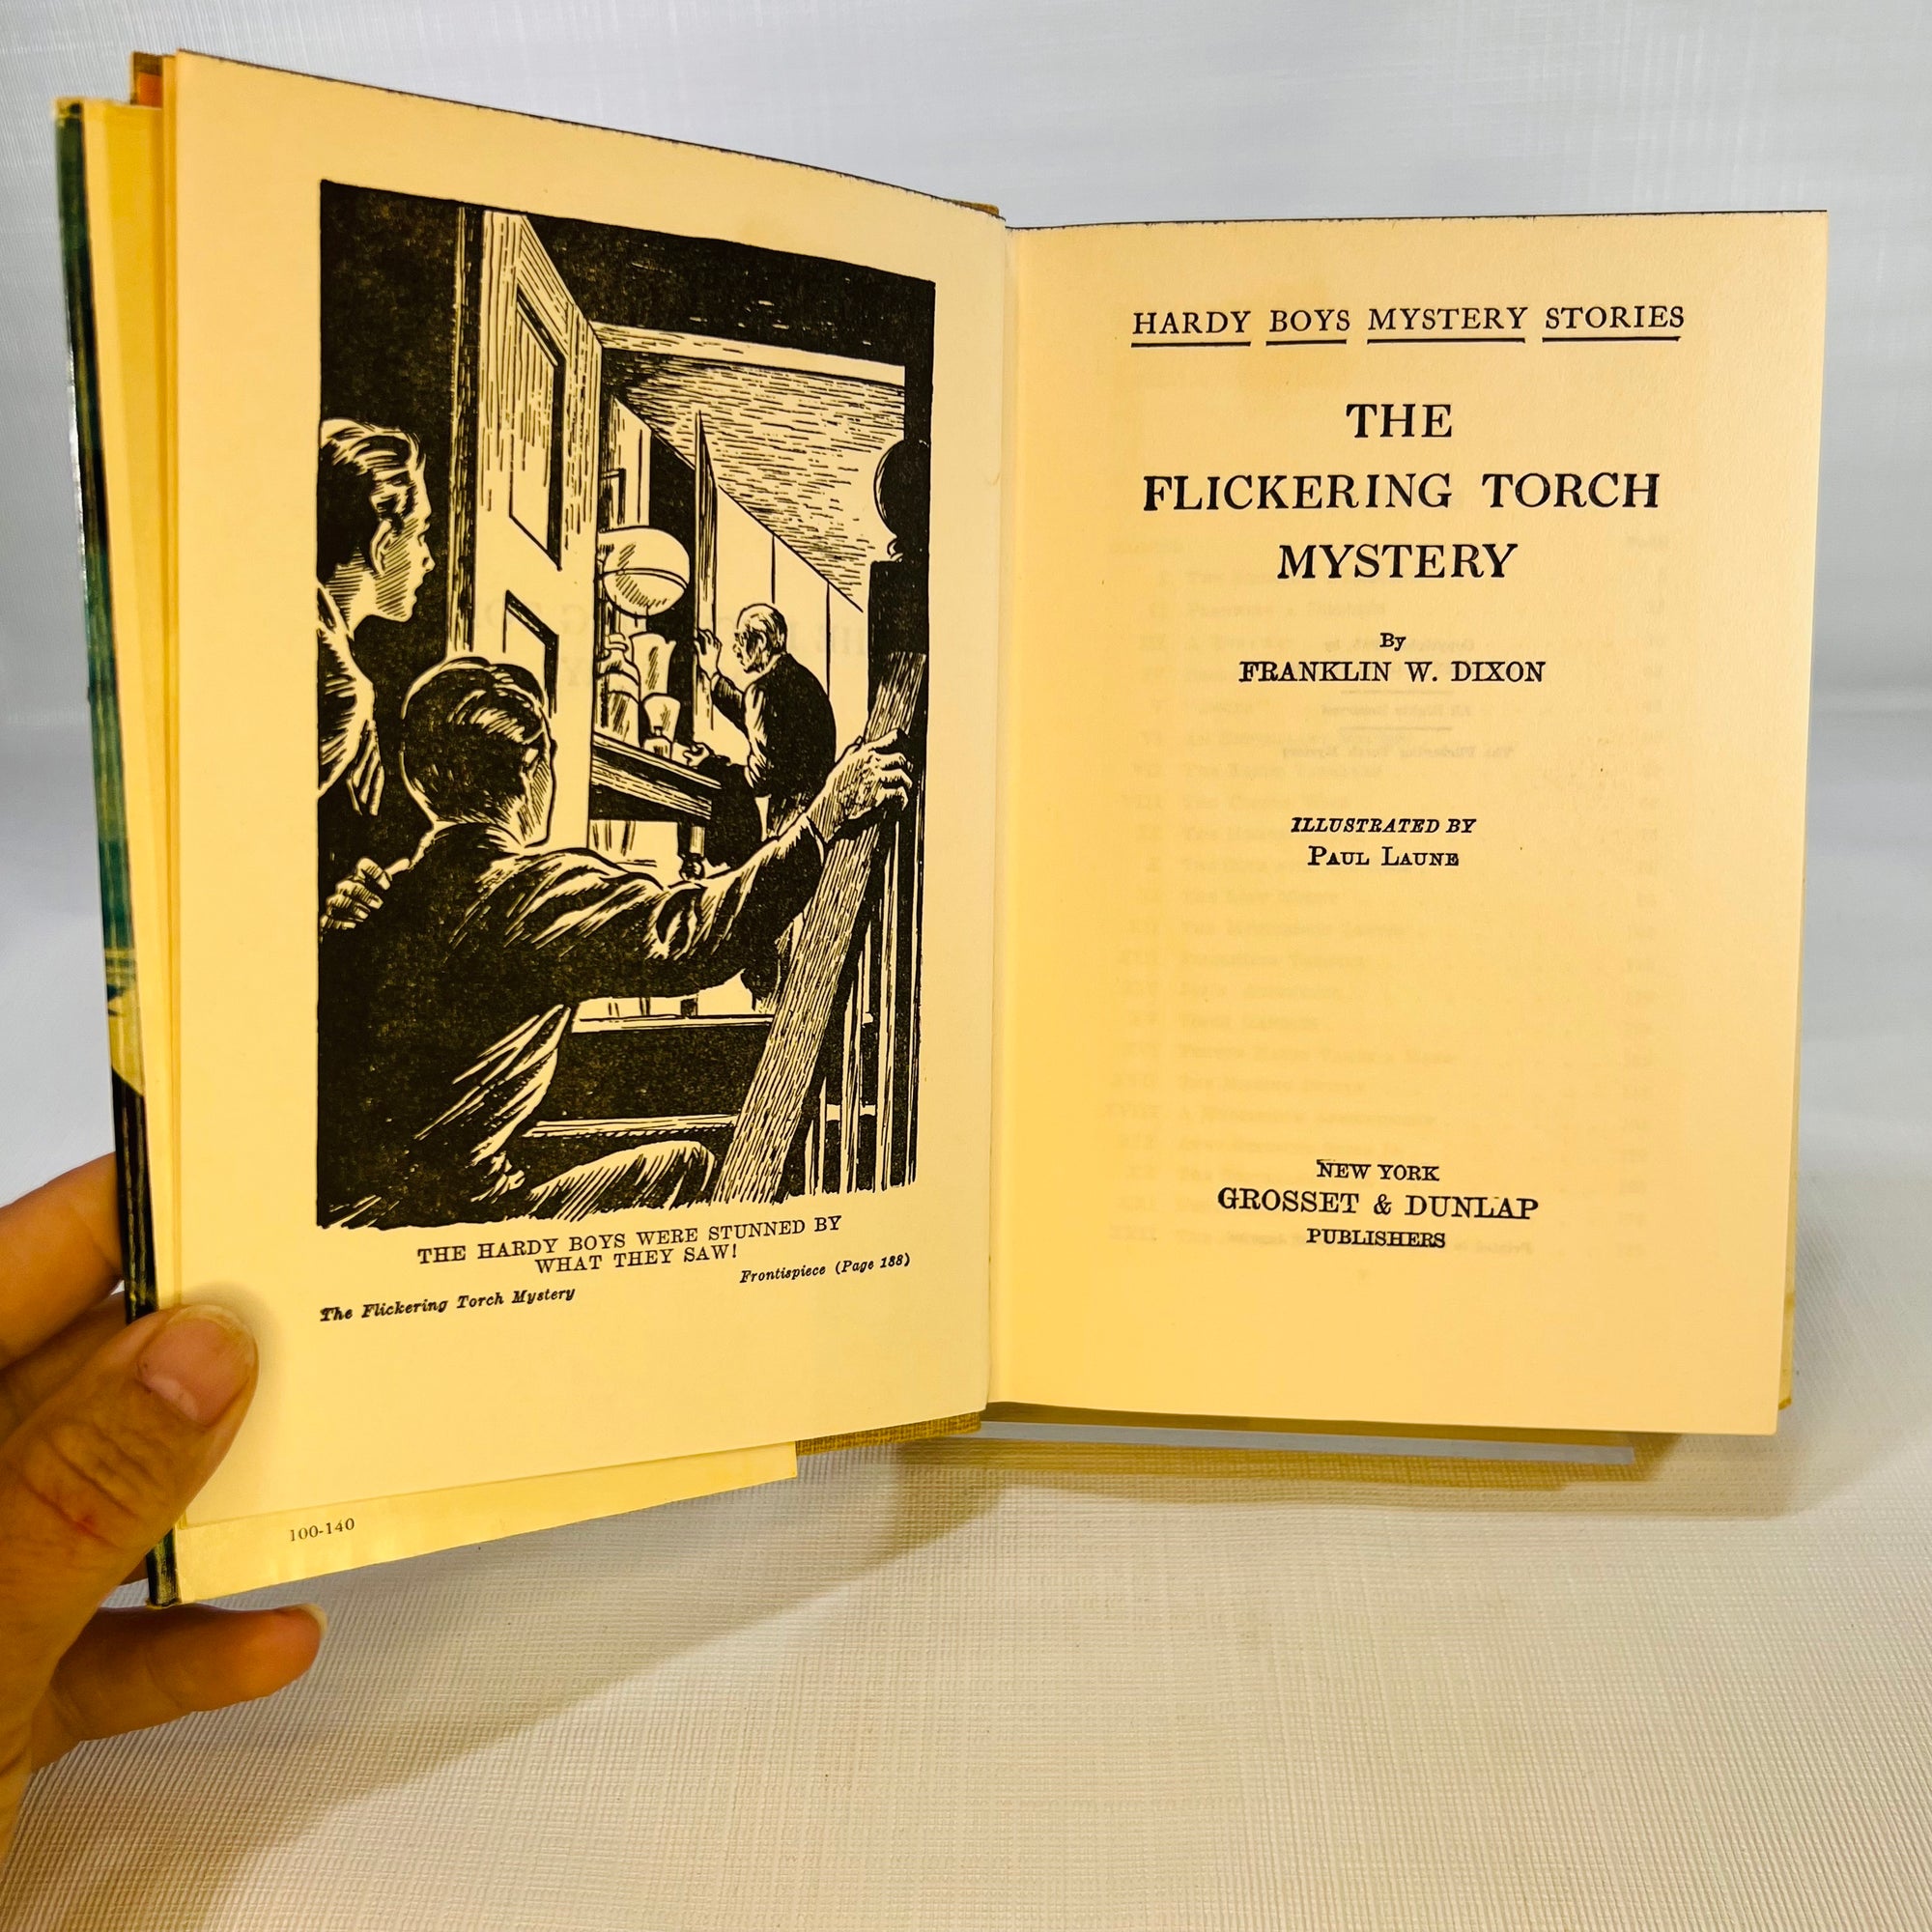 The Hardy Boys The Flickering Torch Mystery by Franklin w. Dixon 1943 Grosset & Dunlap